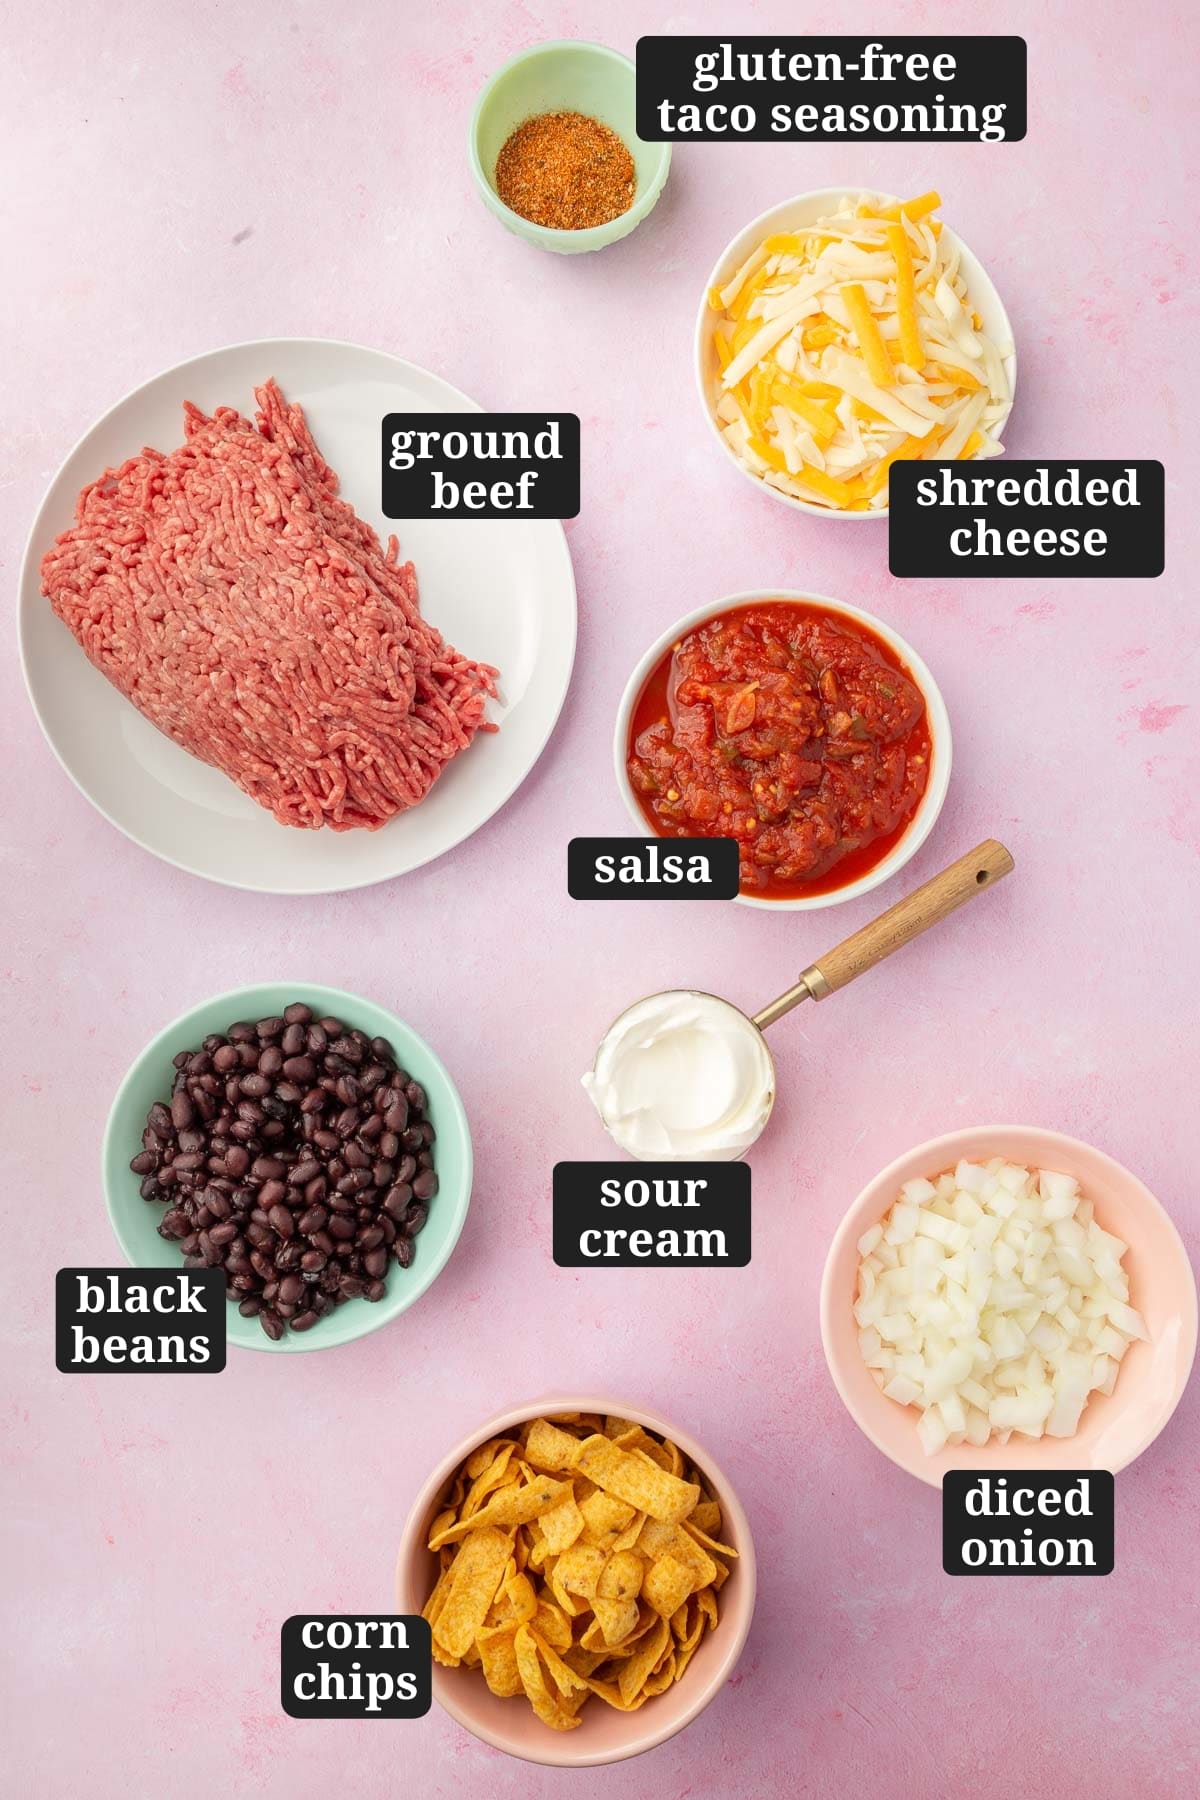 Ingredients in bowls to make walking taco casserole, including ground beef, gluten-free taco seasoning, shredded cheese, salsa, sour cream, black beans, Frito corn chips, and diced yellow onion with text overlays over each ingredient.